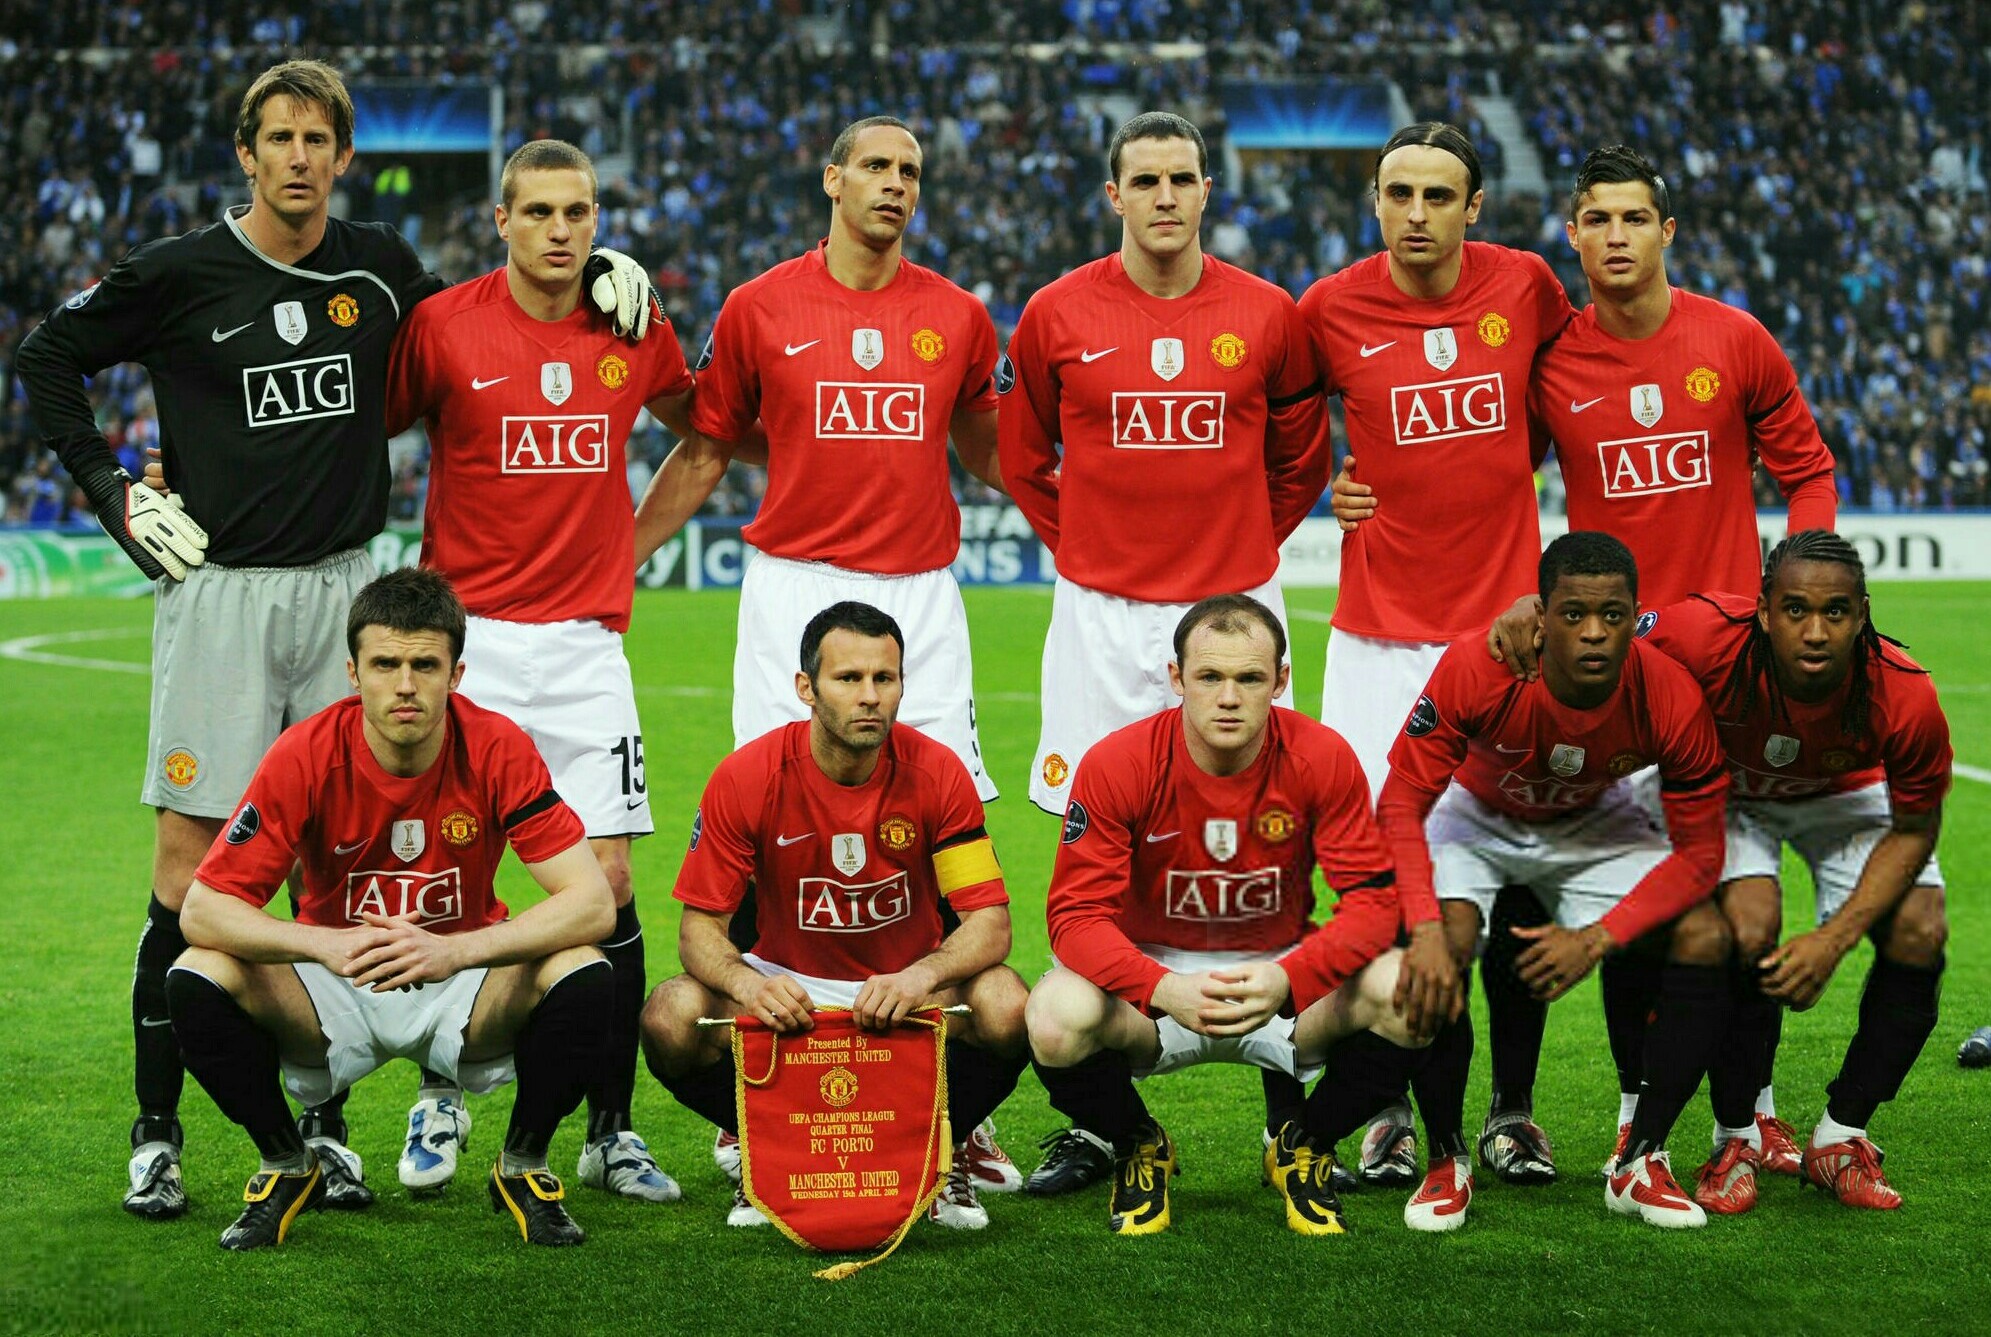 Ams_R on X: Squad Manchester United Line Up - 2009 - 2010 - 2011